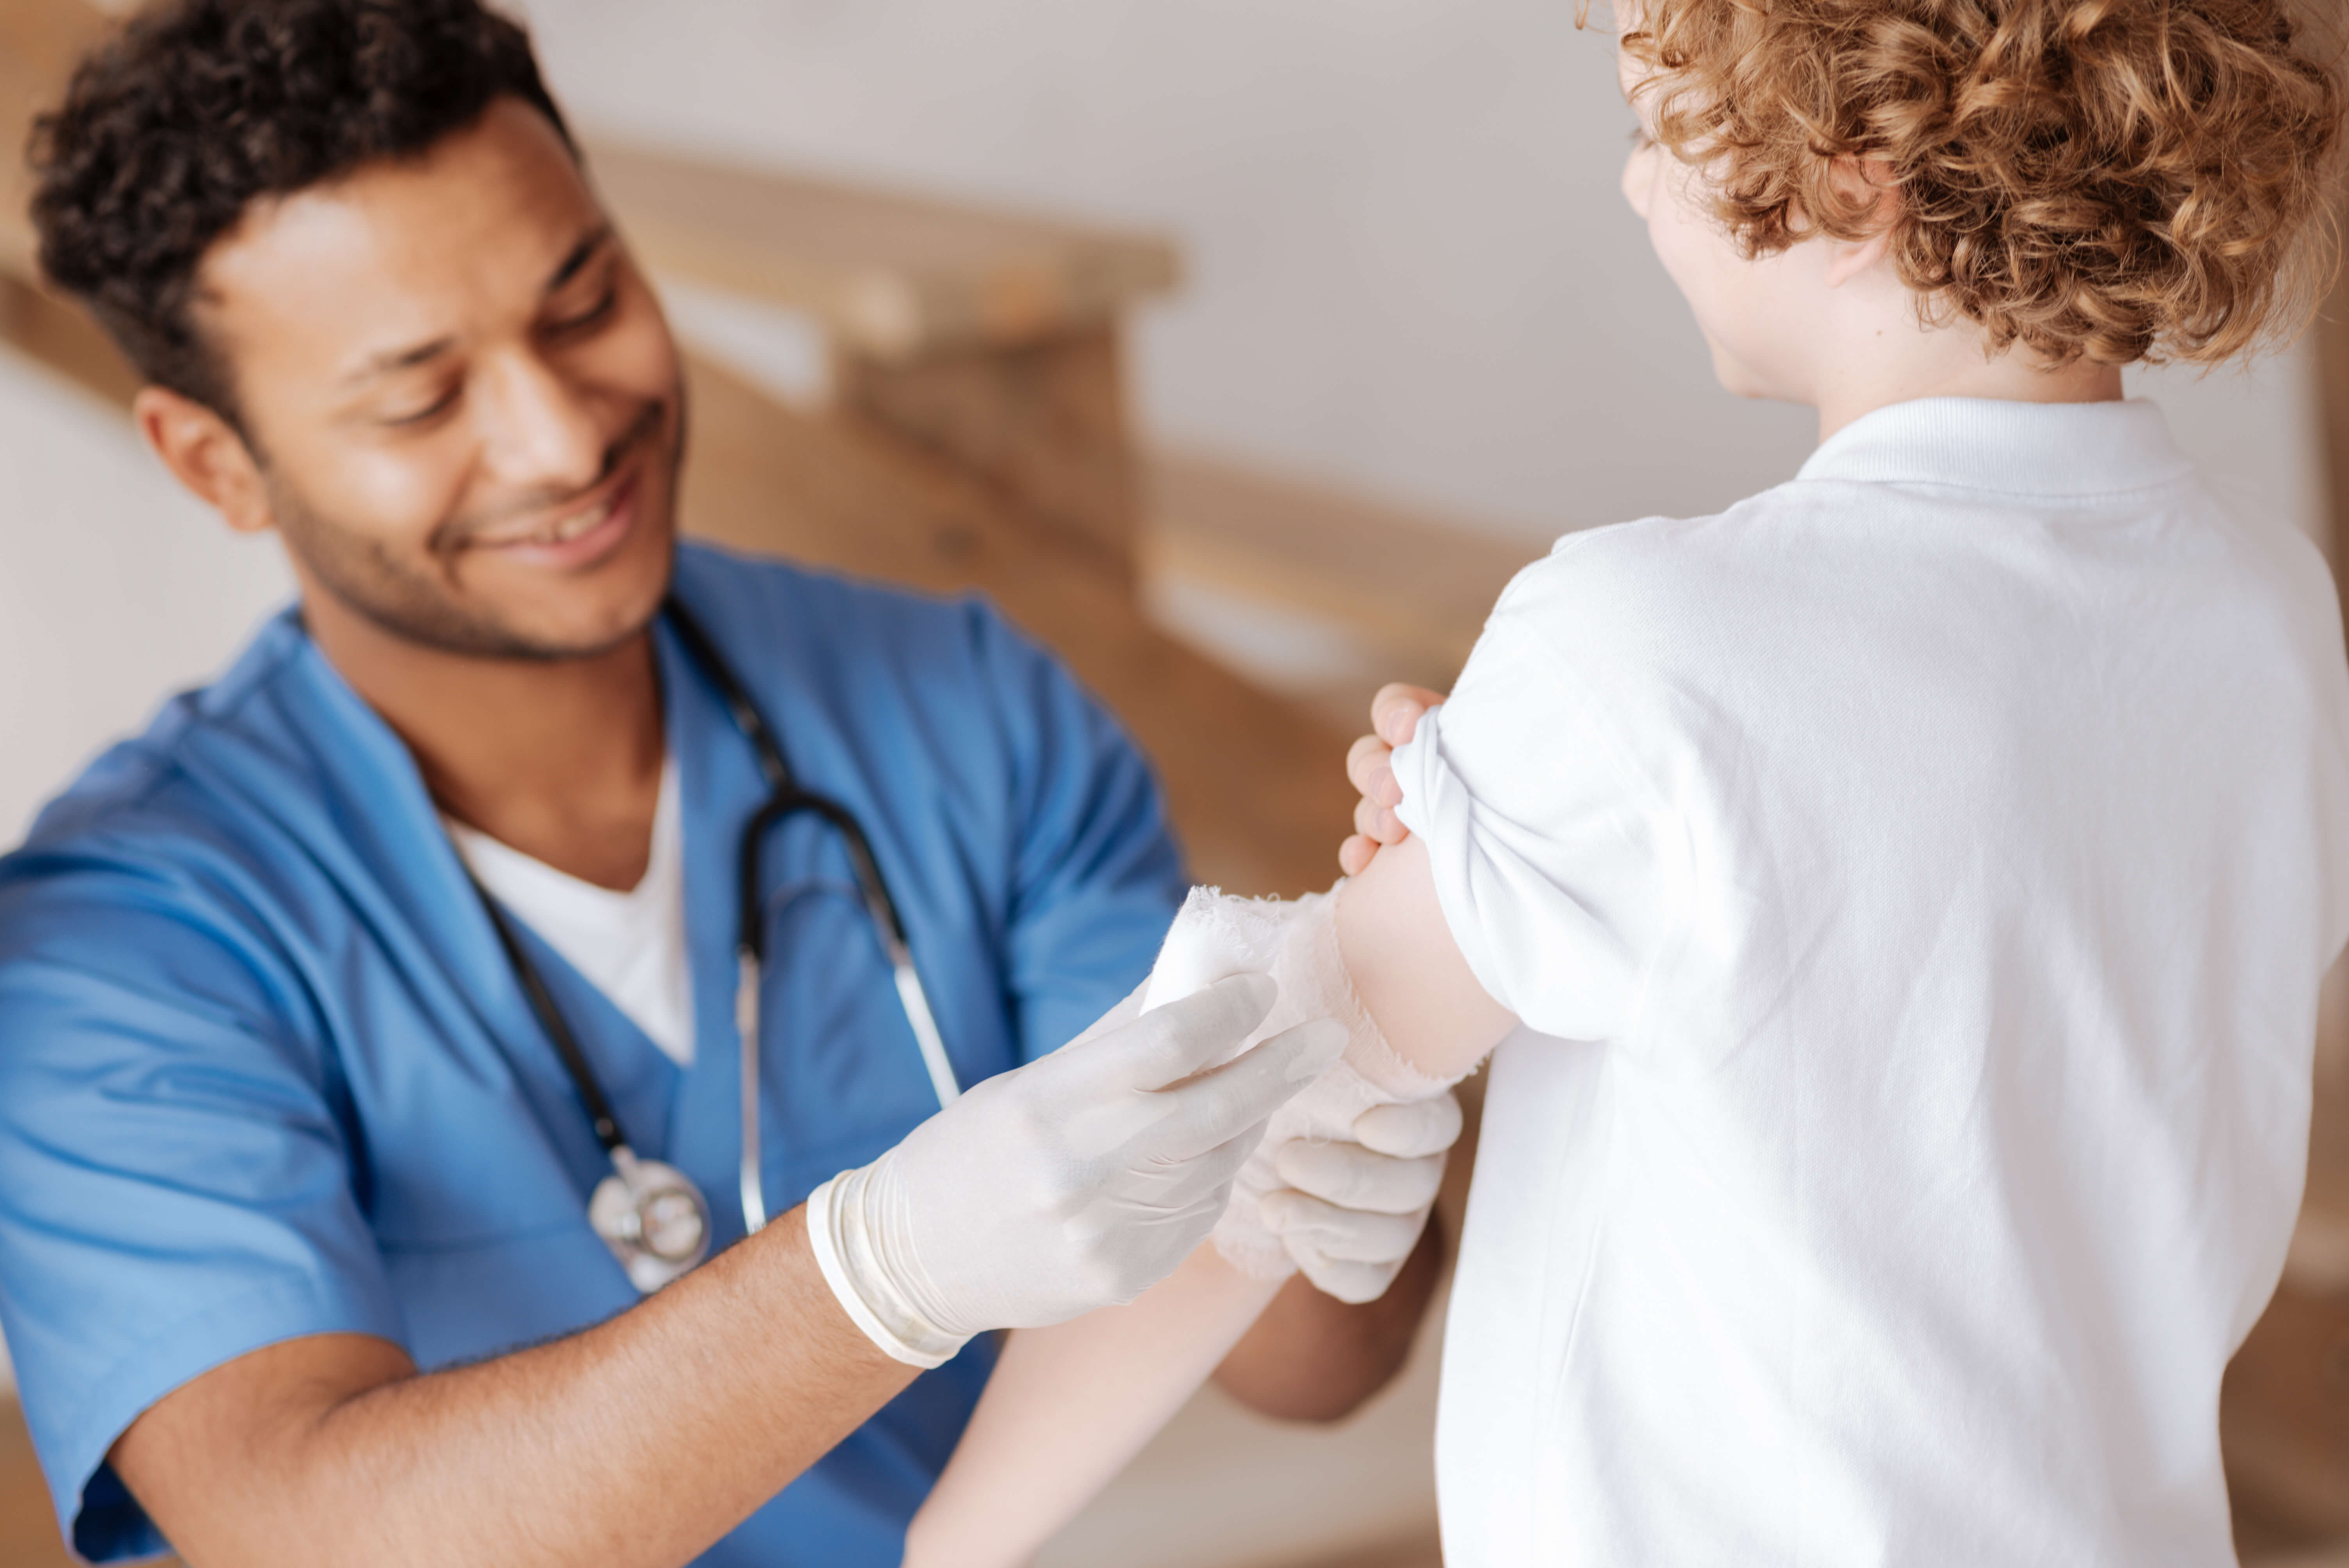 Get urgent care and timely treatment for unexpected, non-life threatening illnesses, conditions and minor injuries from our board-certified doctors and nurses.